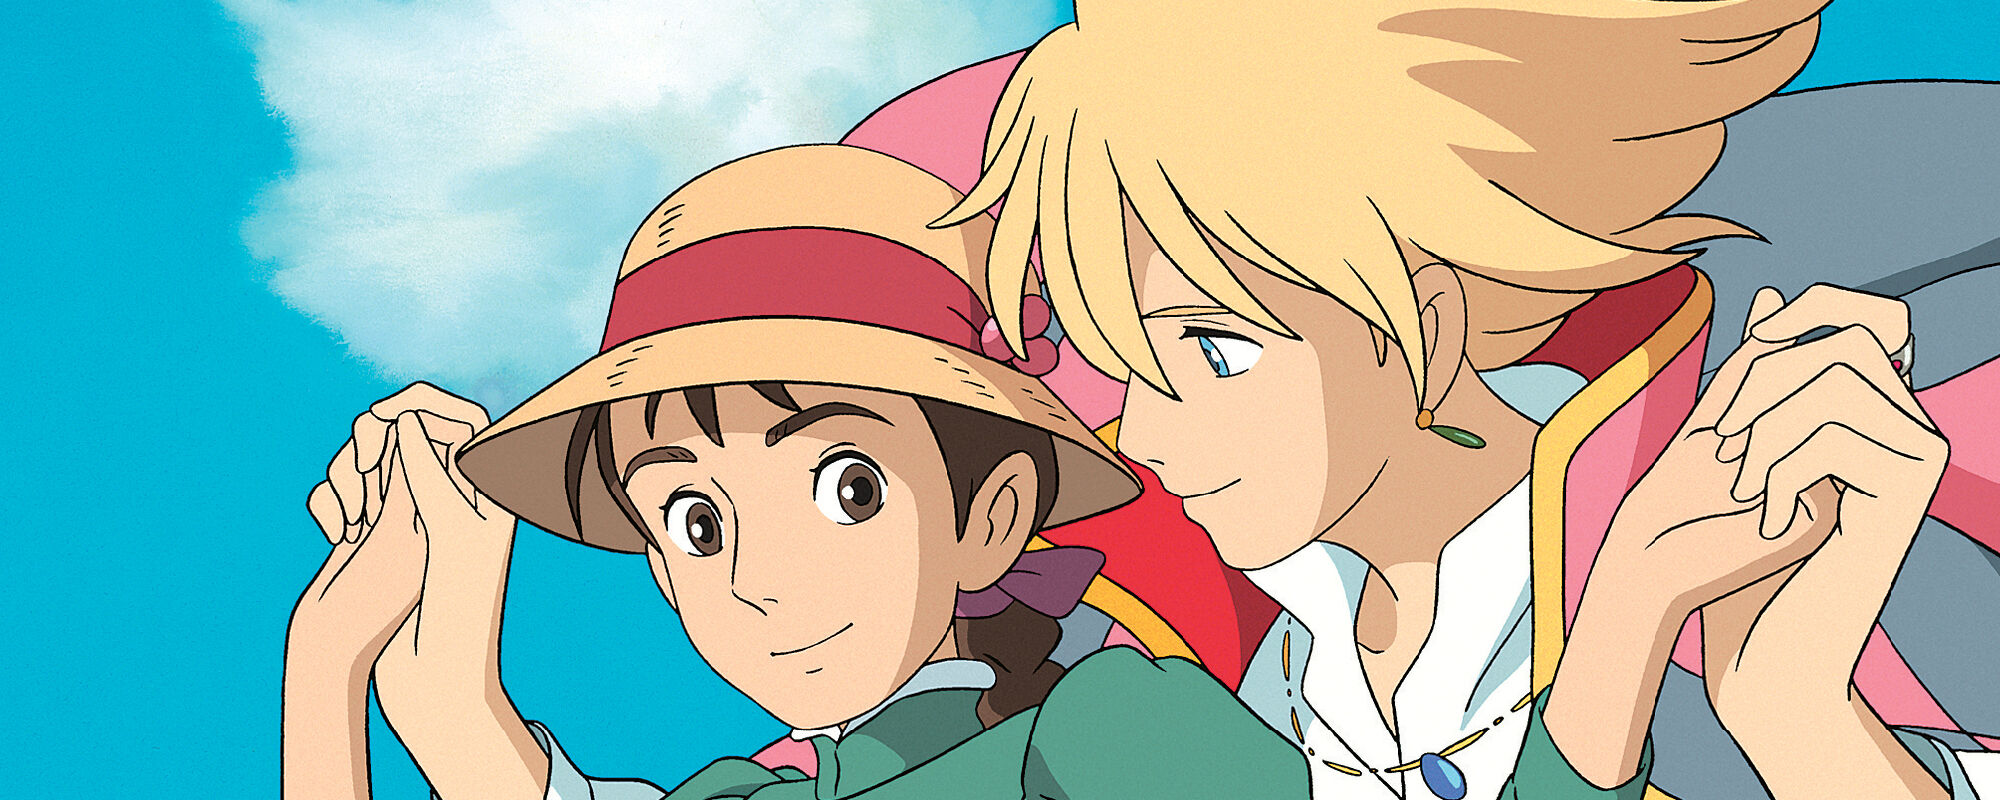 Howl's Moving Castle : Jean Simmons, Christian Bale, Blythe Danner, Billy  Crystal, Emily Mortimer, Hayao Miyazaki: Movies & TV 